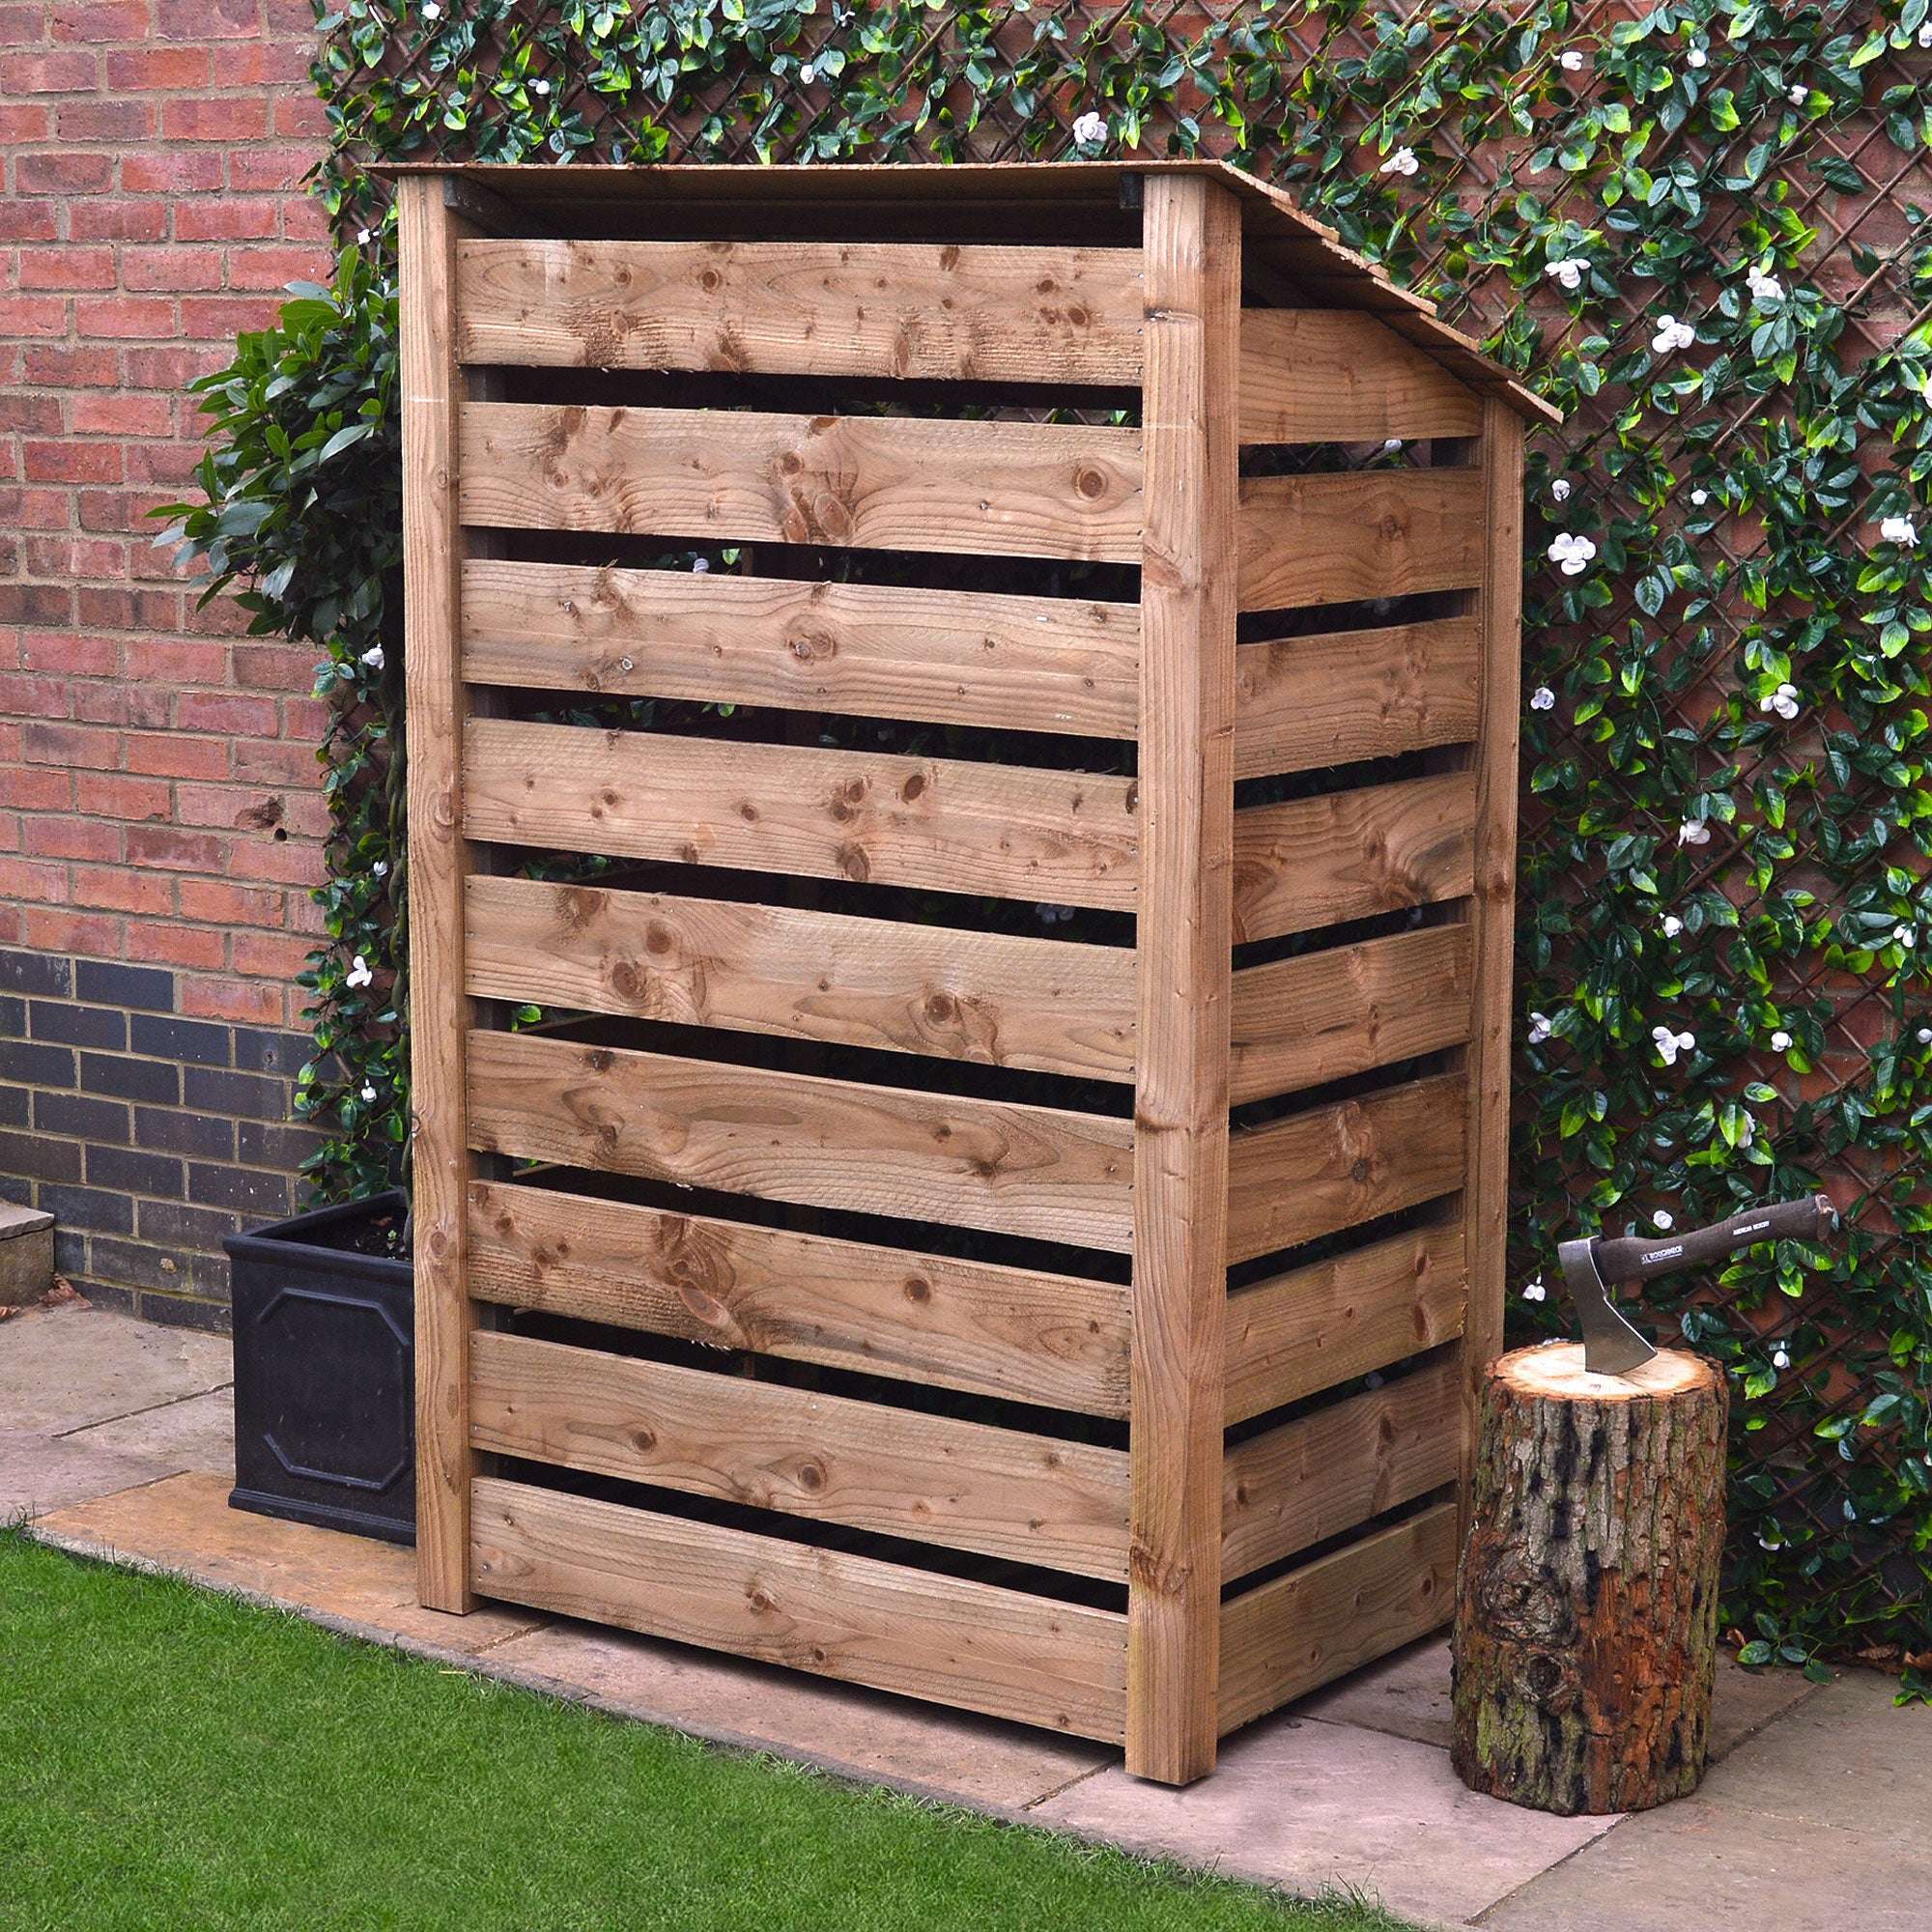 Rutland Country Greetham Log Store With Kindling Shelf - 6ft:Rutland County,Exceptional Garden